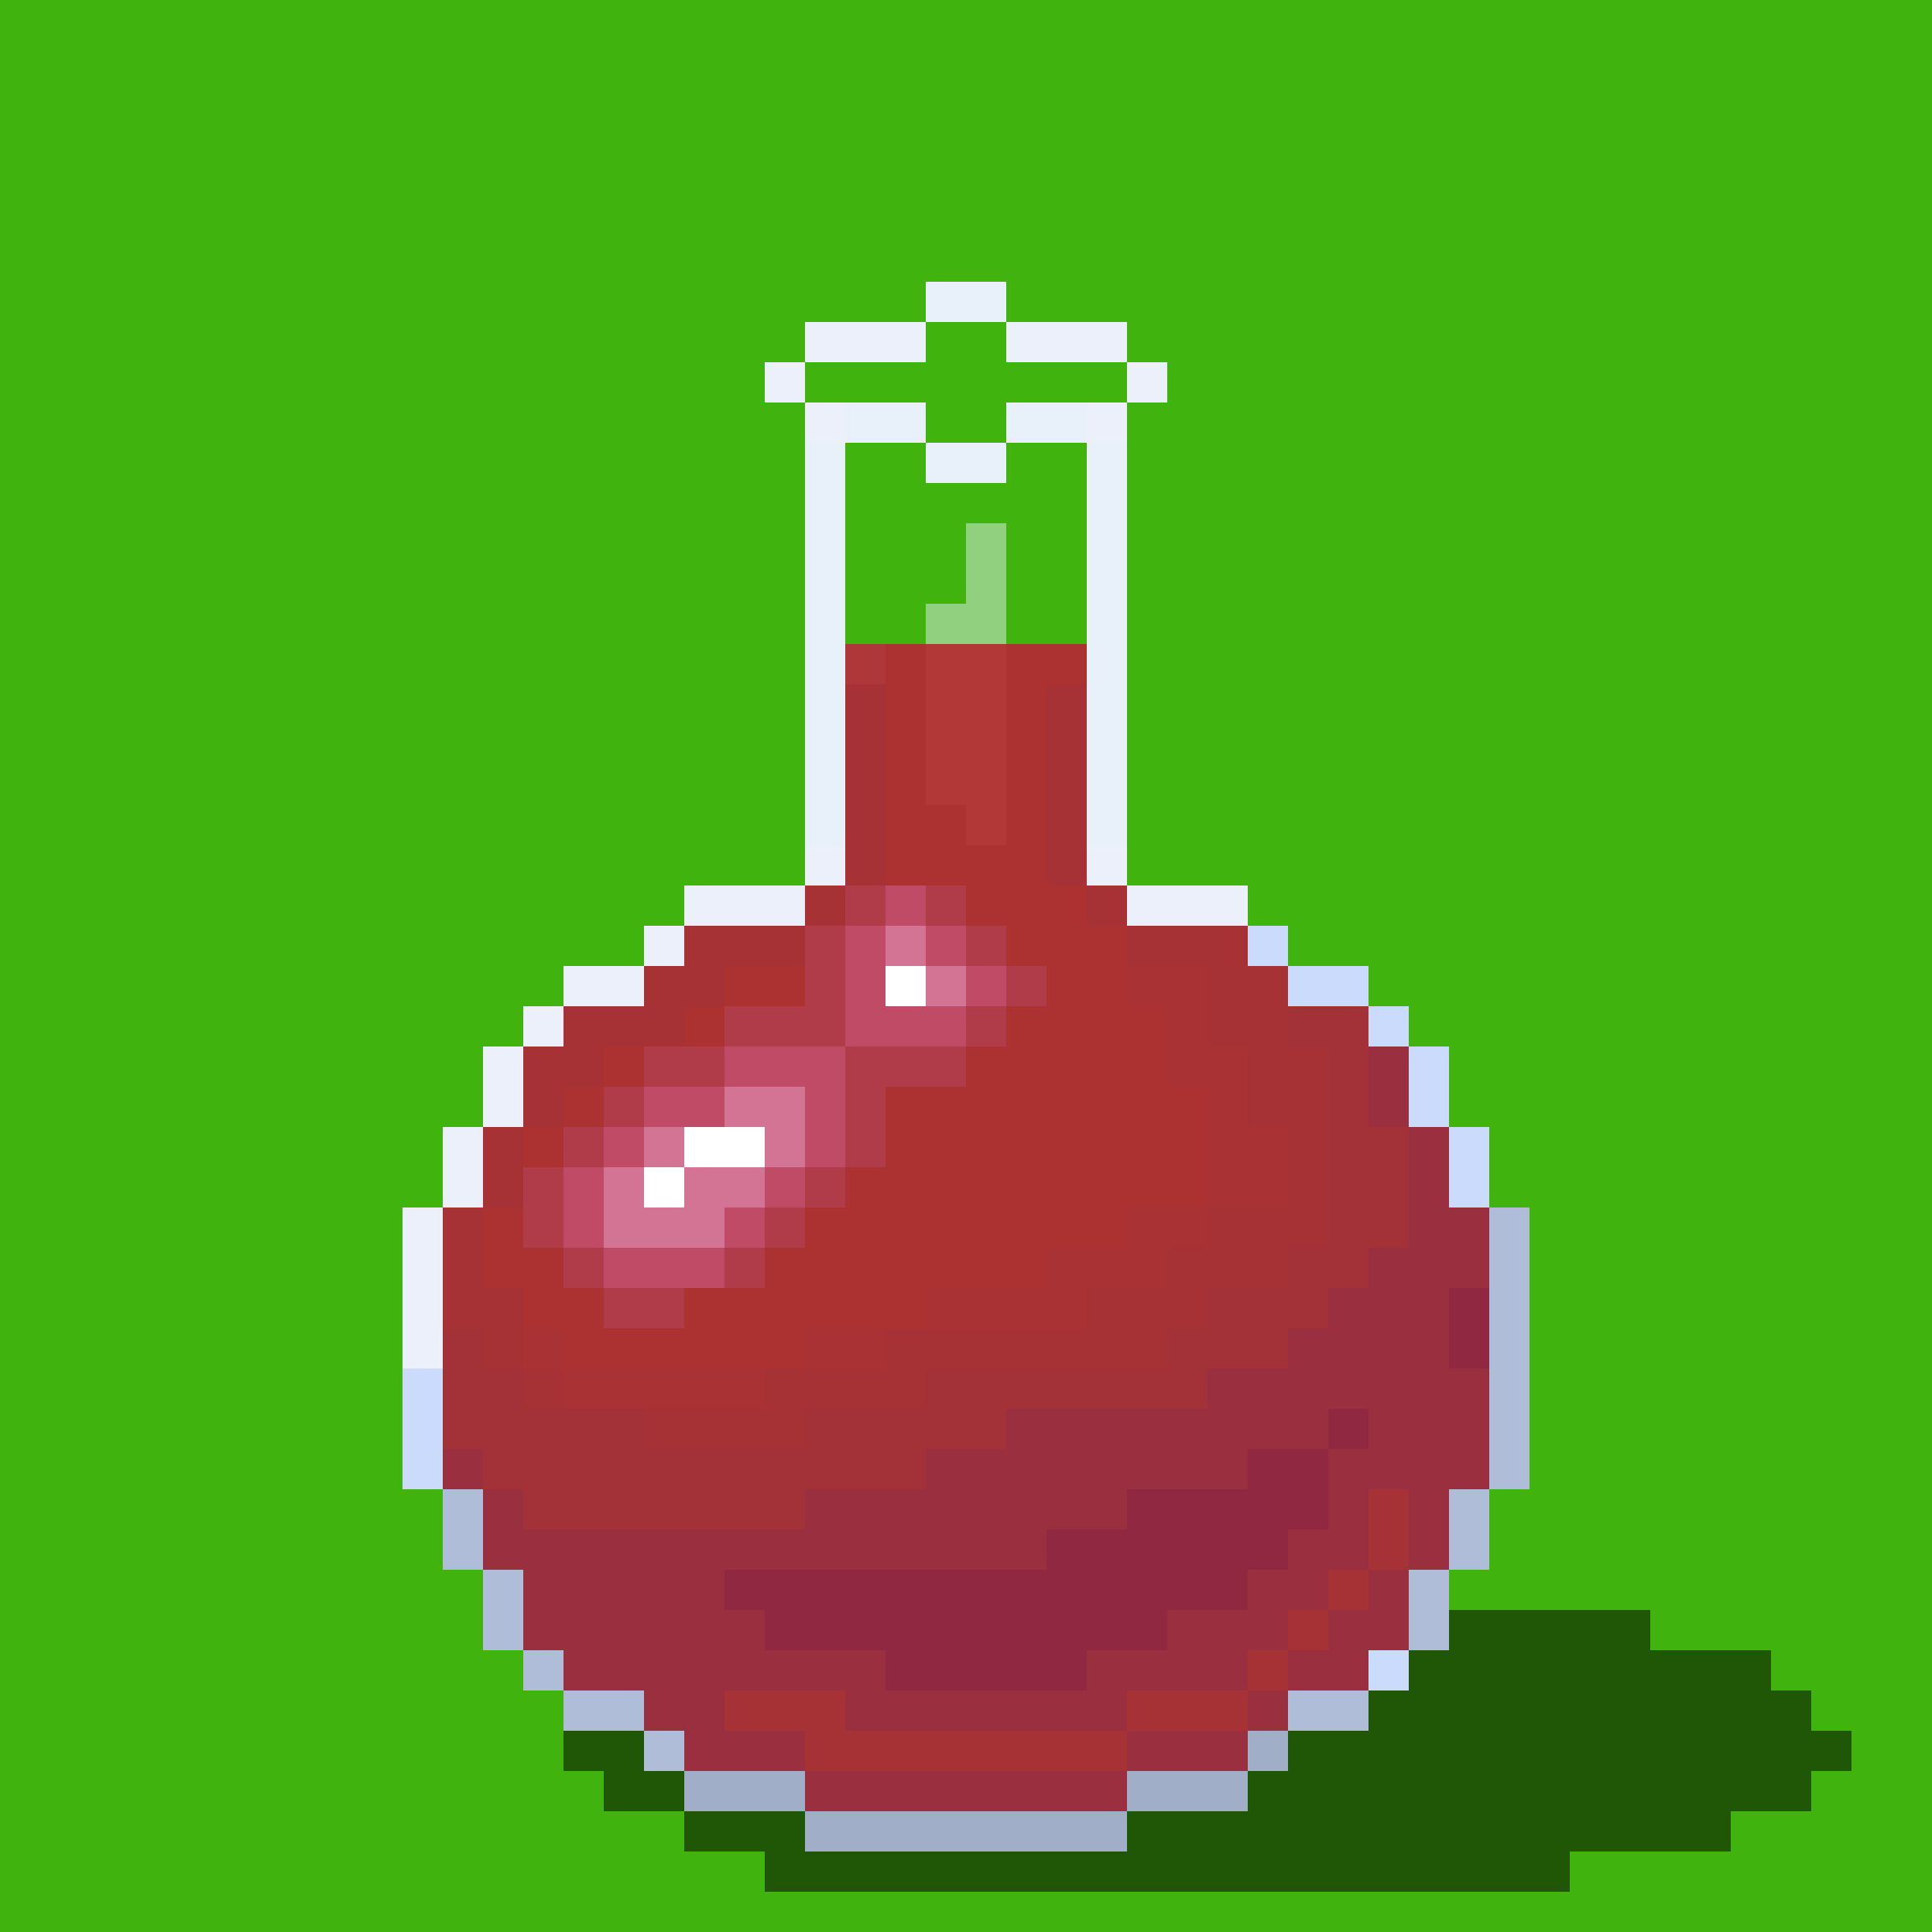 Made a potion